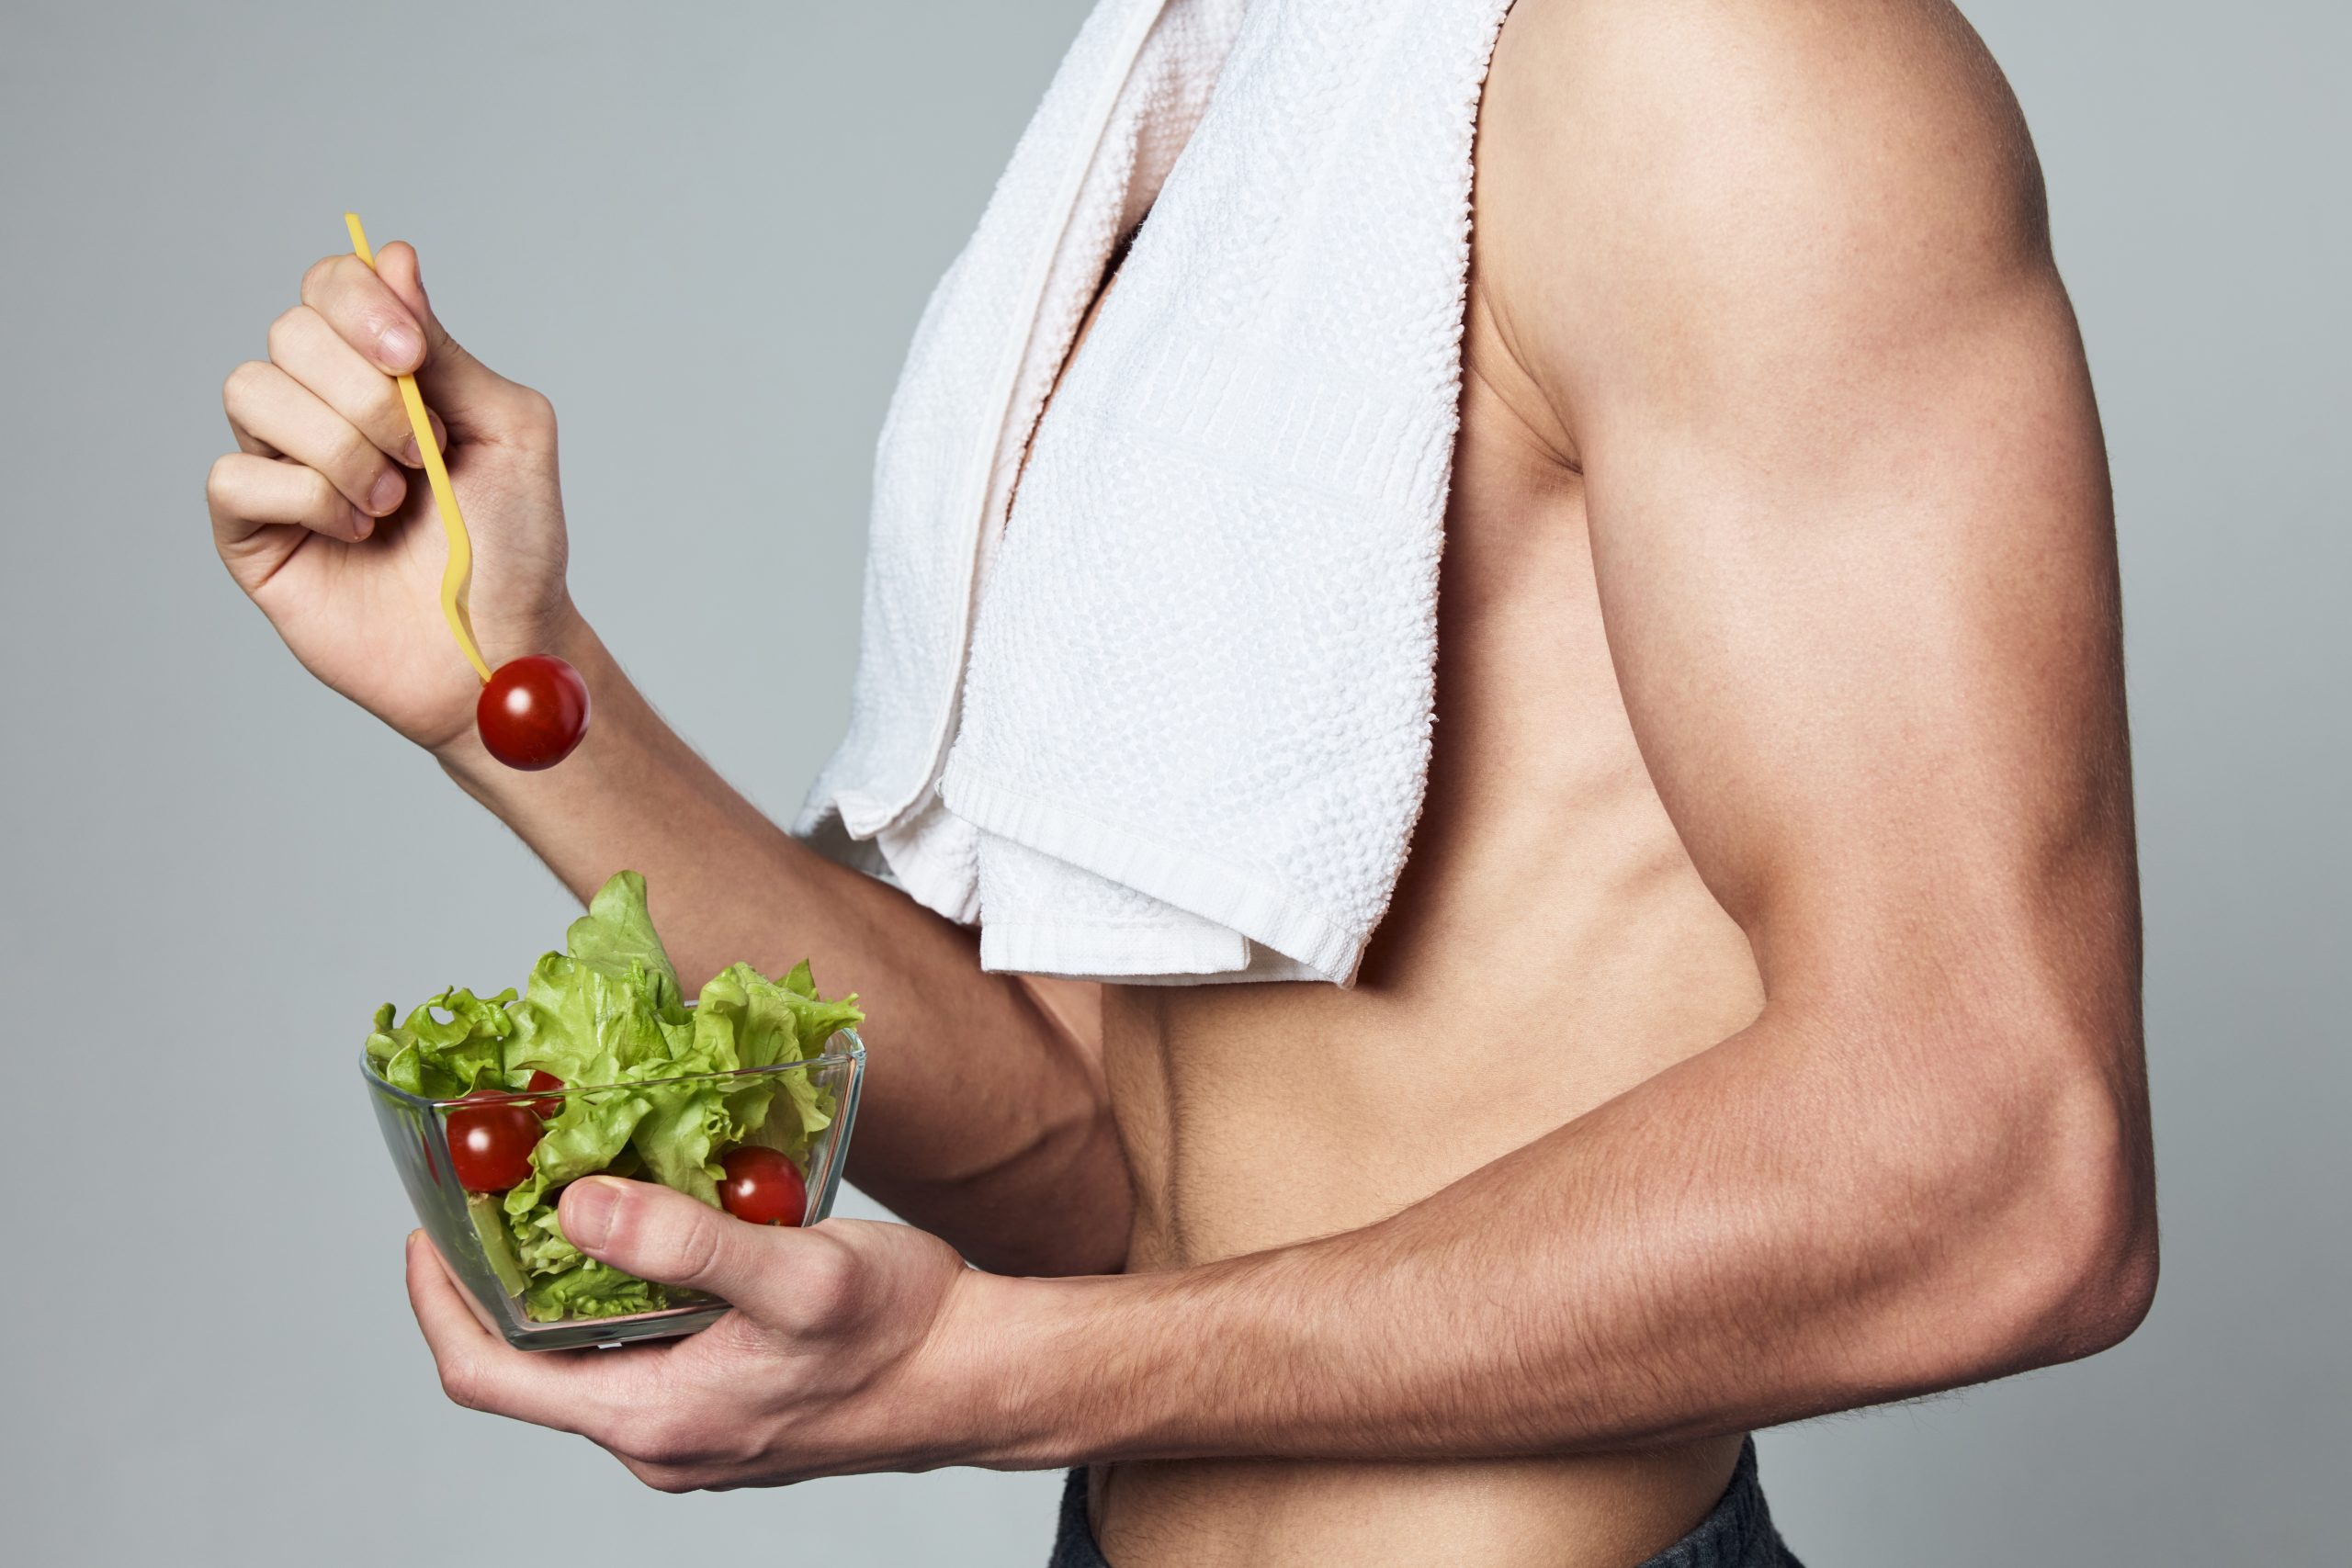 Foods for Gaining Muscle